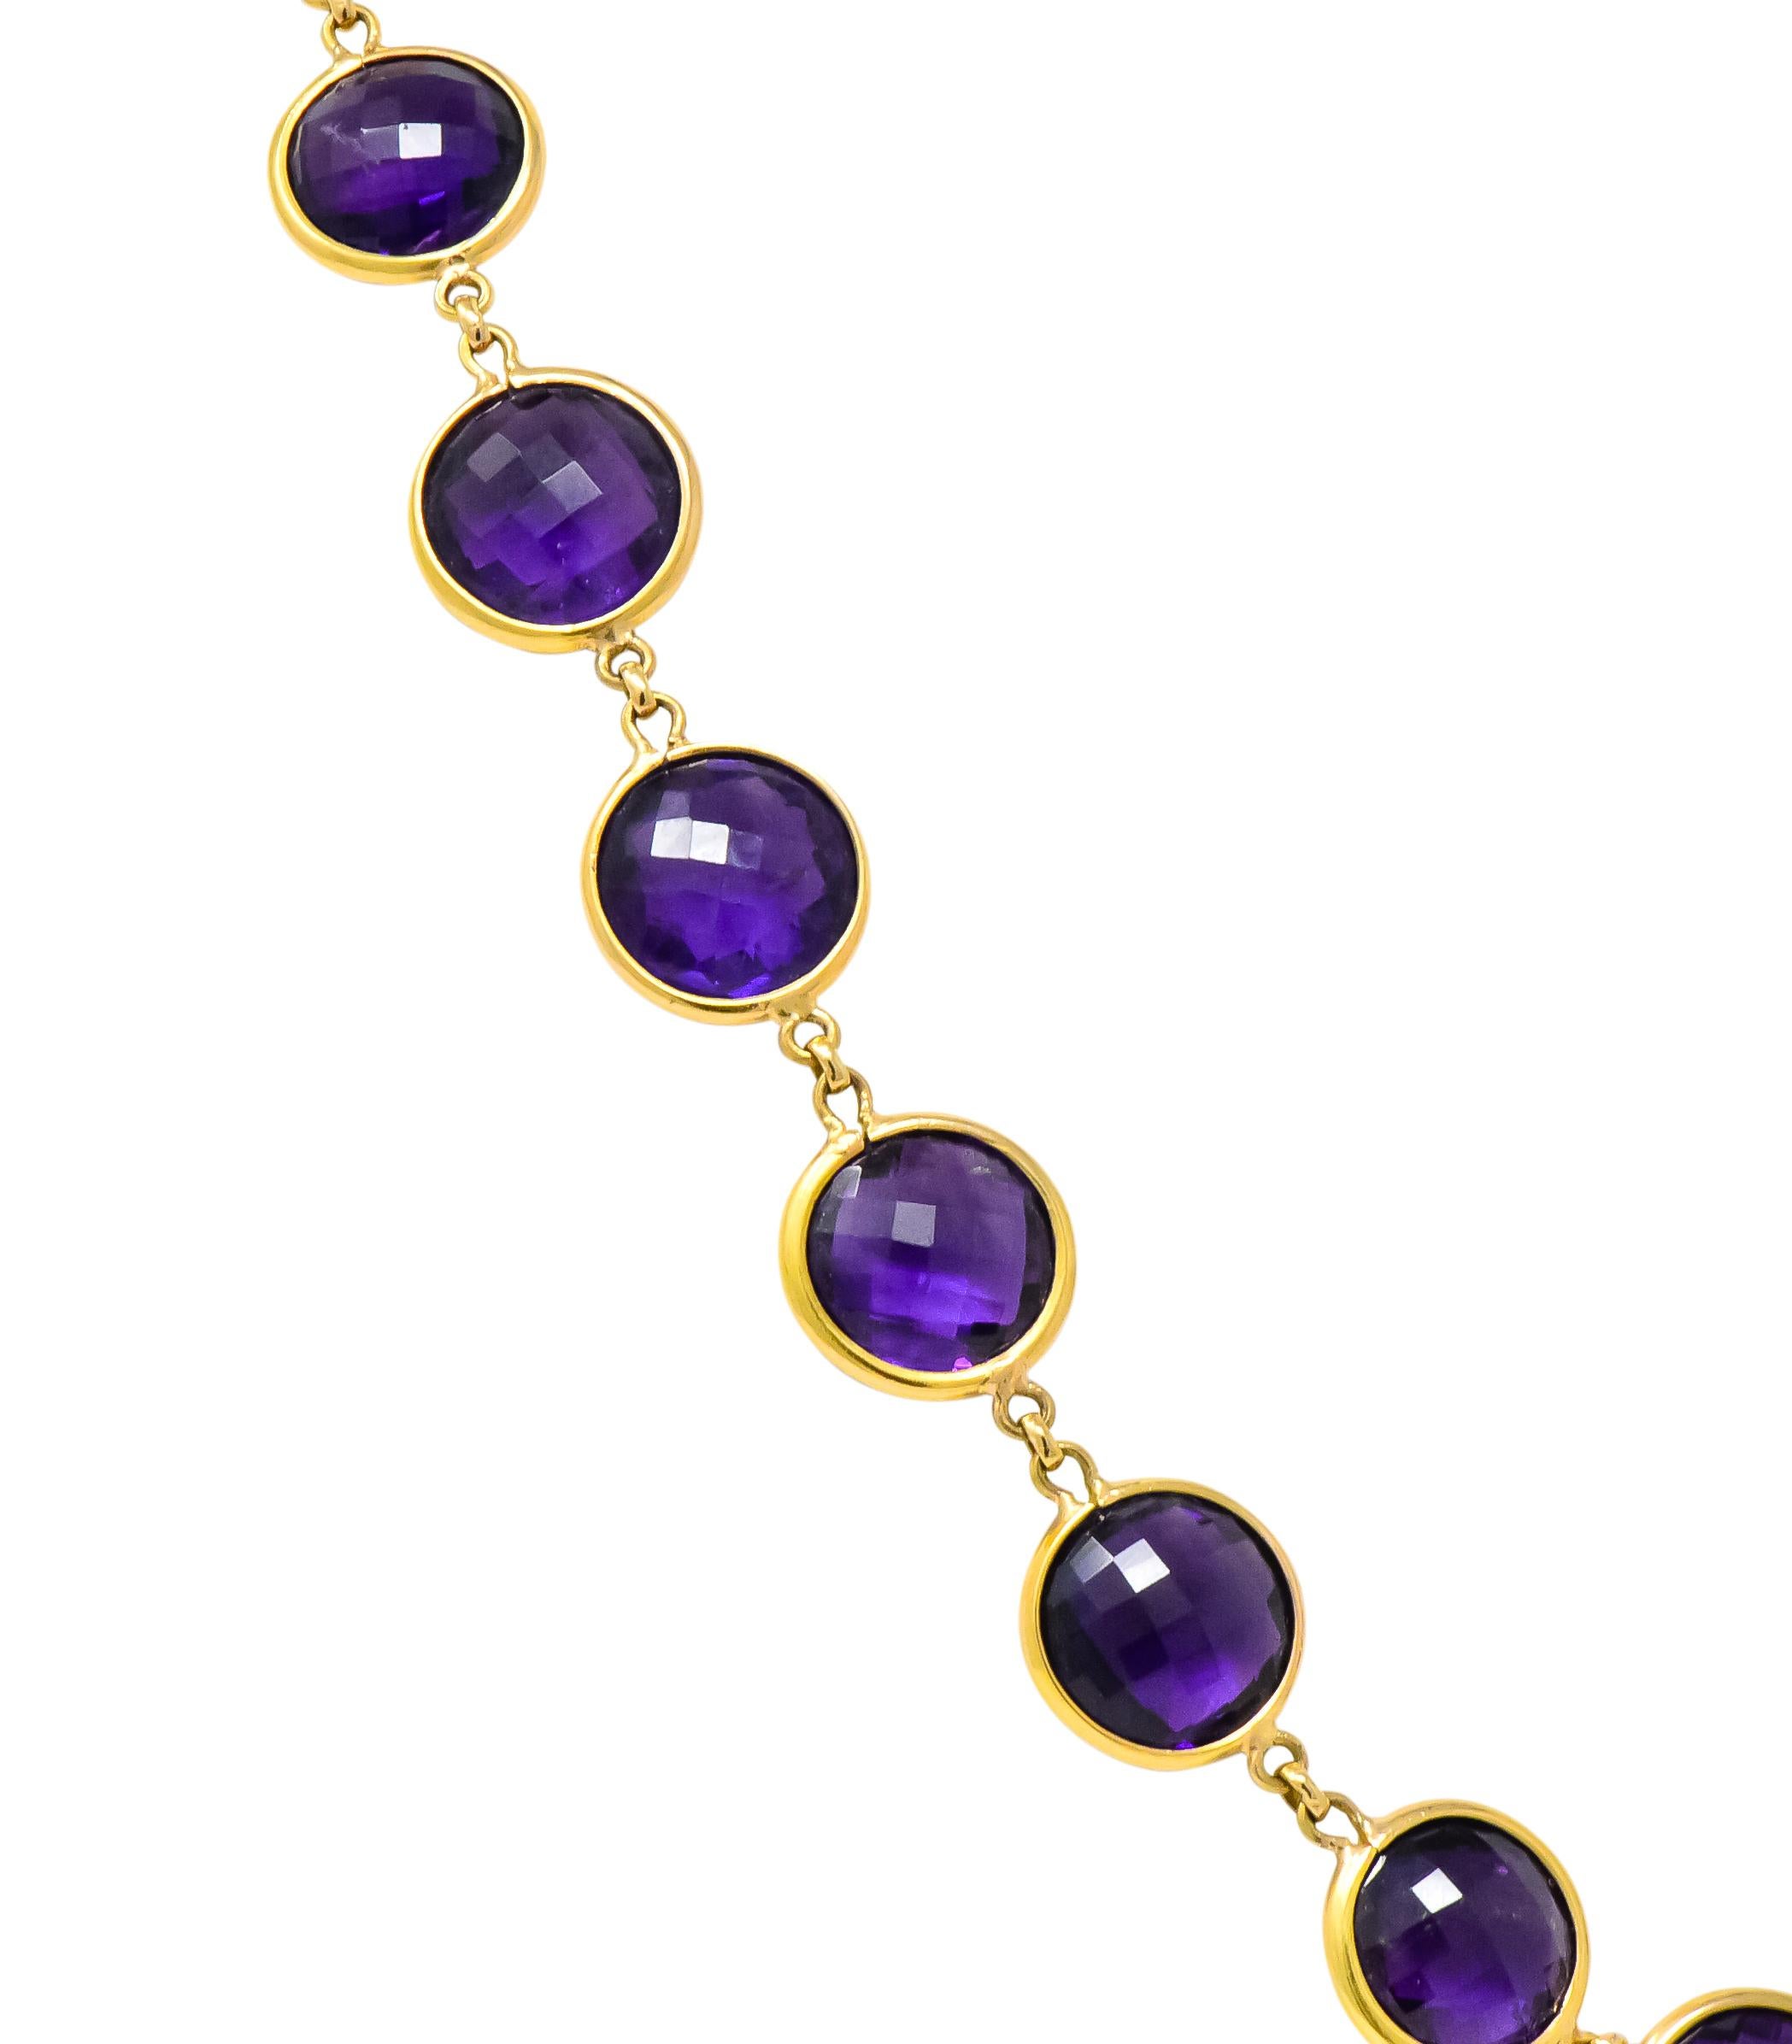 With forty-eight round double cabochon checkerboard cut amethysts 

Measuring approximately 12.0 mm

Vibrant royal purple, and very well matched 

Each bezel set and completed by a lobster style clasp 

Stamped 18K

Length: 37 1/4 Inches

Width: